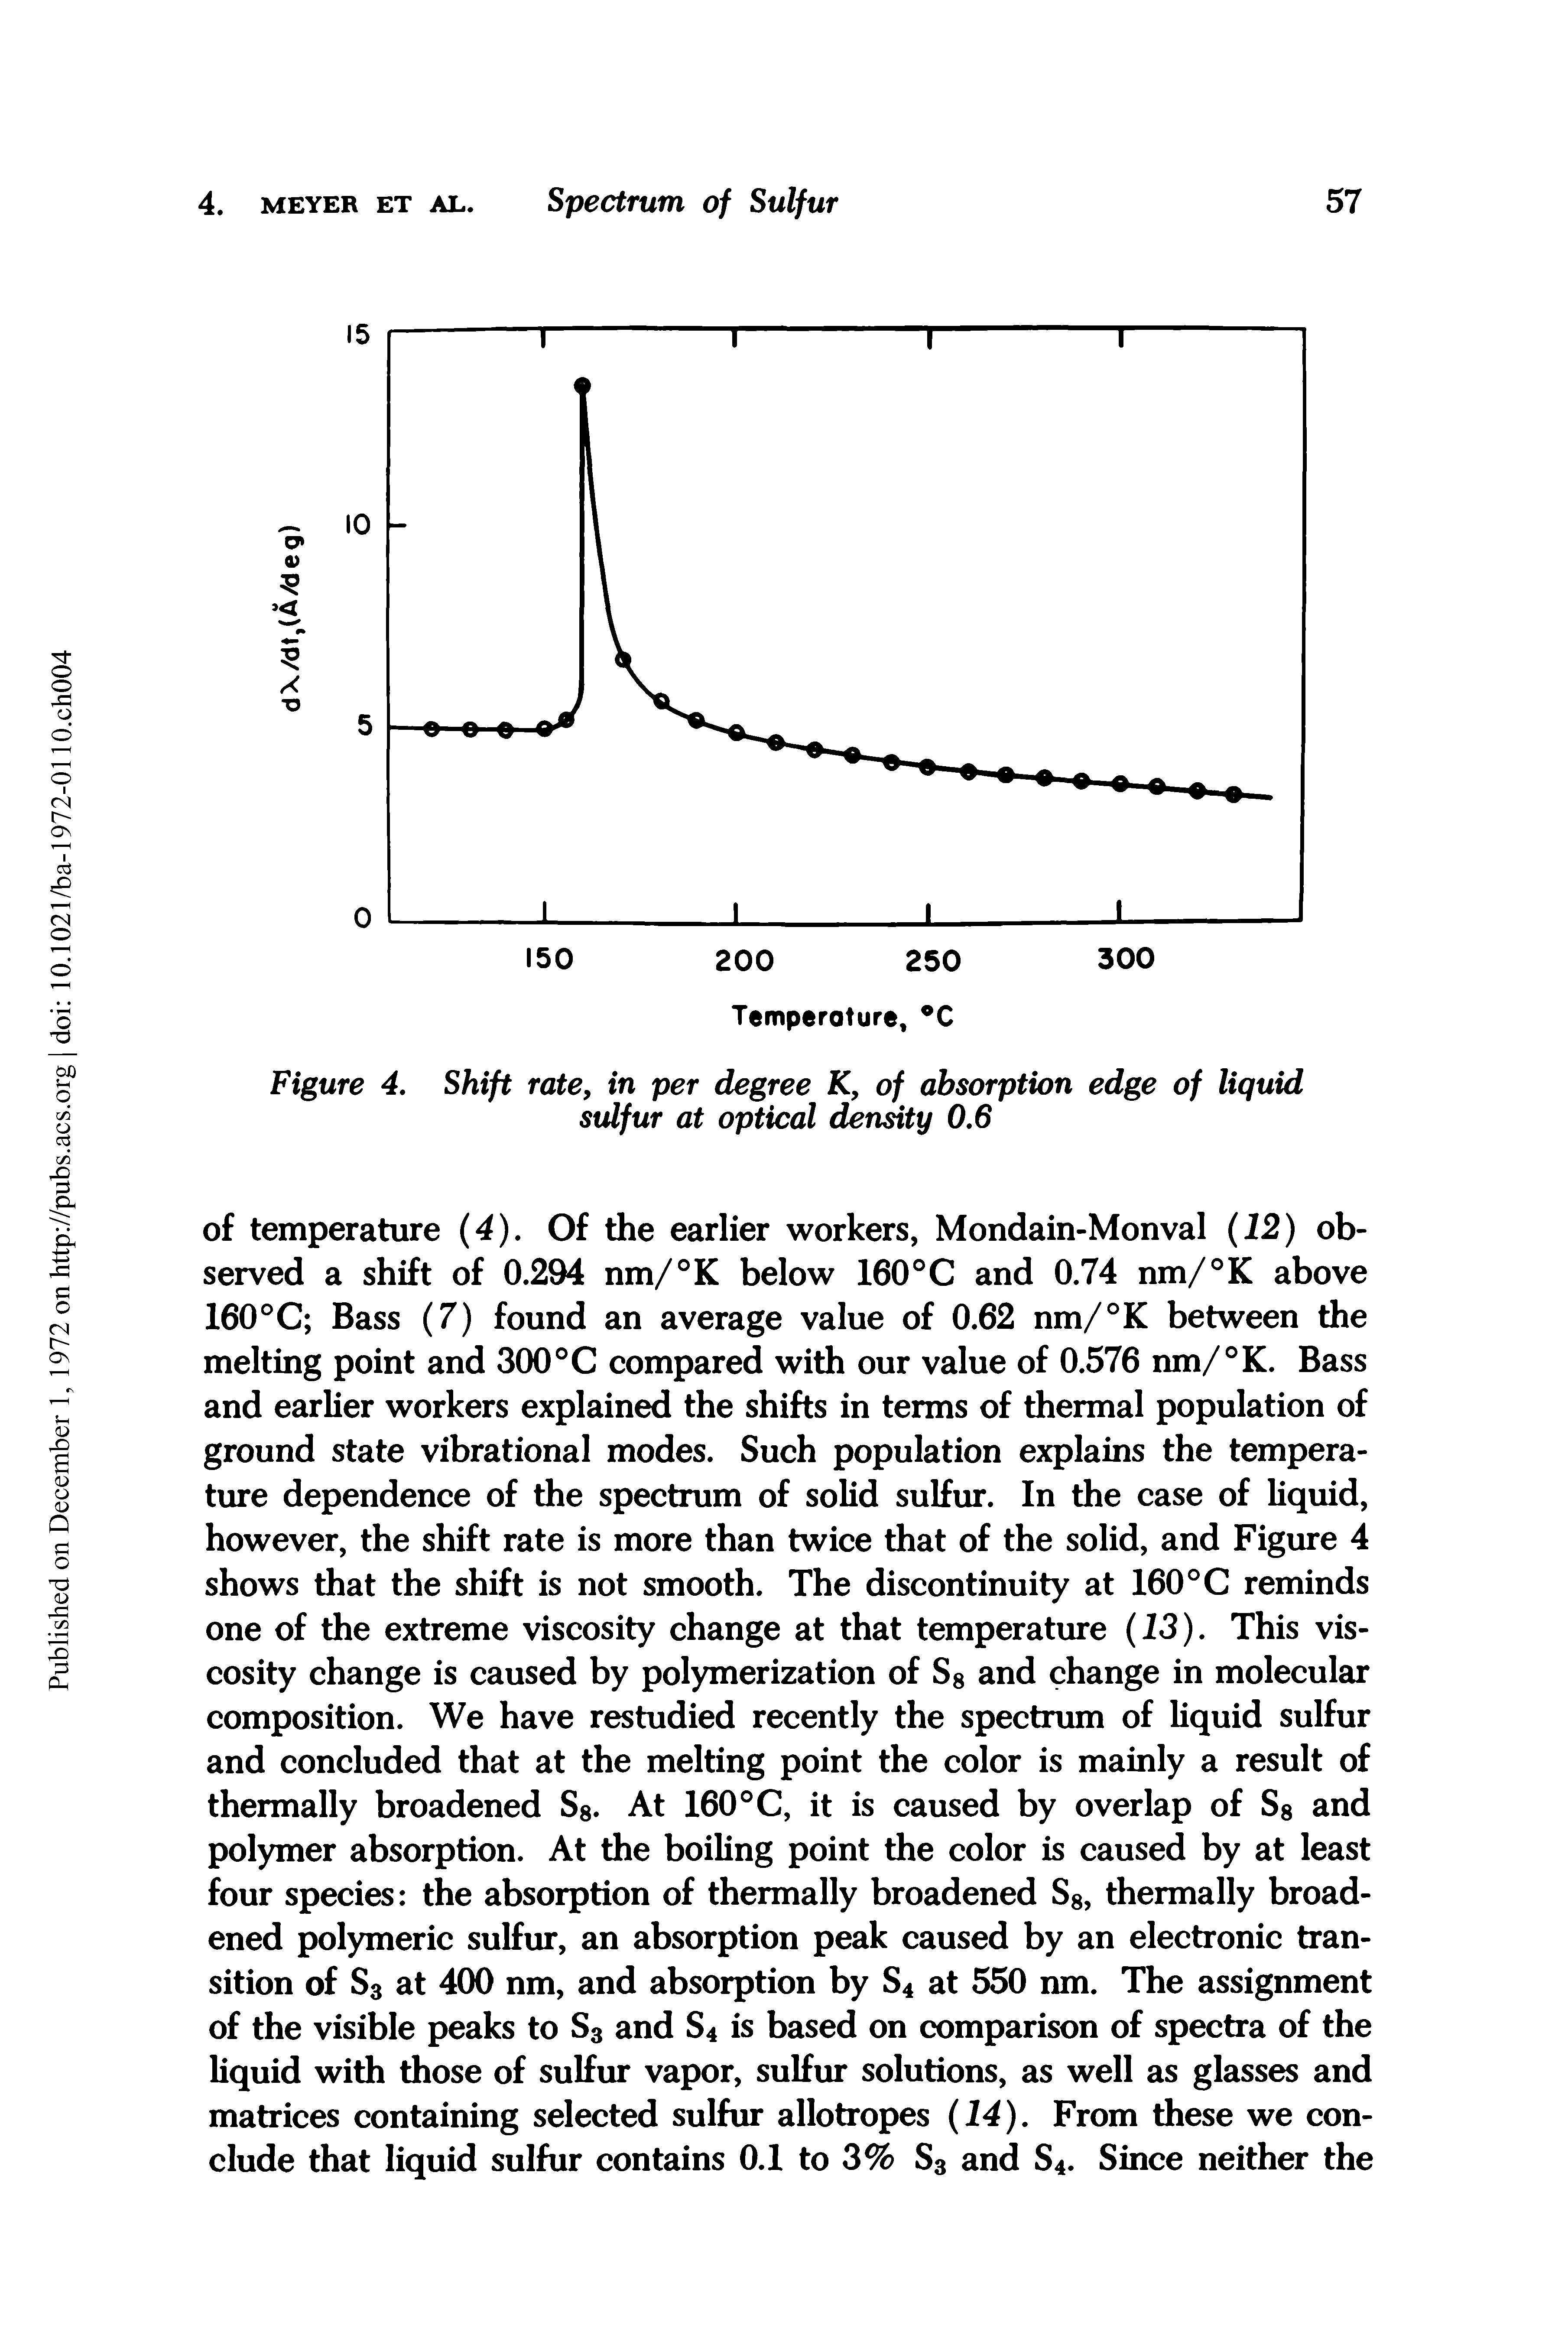 Figure 4, Shift rate, in per degree K, of absorption edge of liquid sulfur at optical density 0,6...